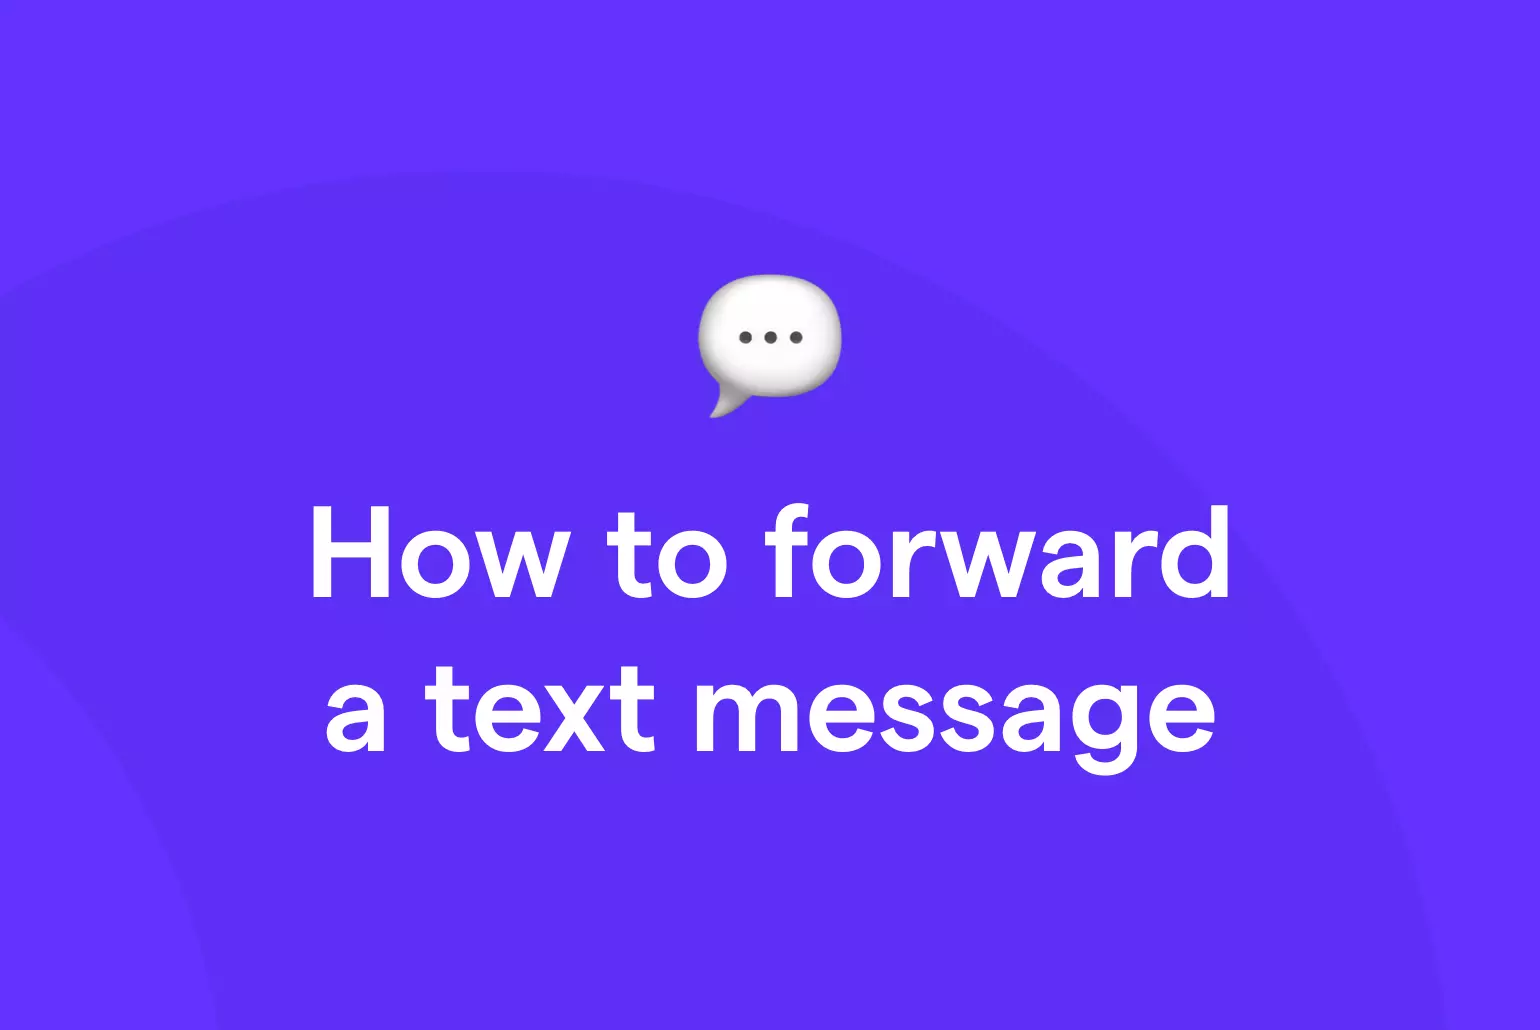 How to forward a text message